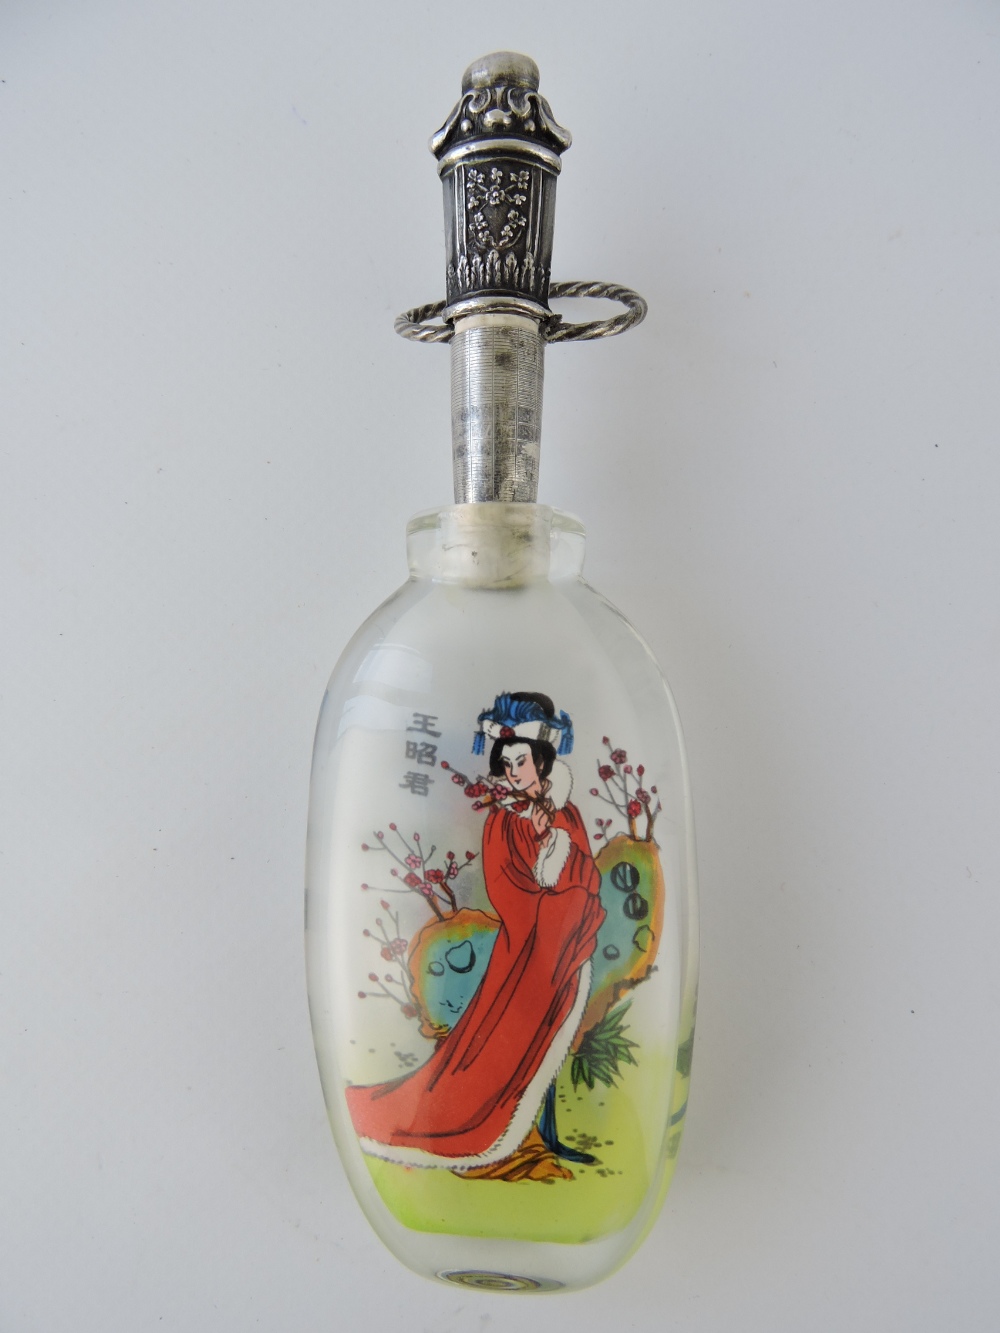 A 20th century Chinese interior painted snuff bottle, the decoration showing lute player with an